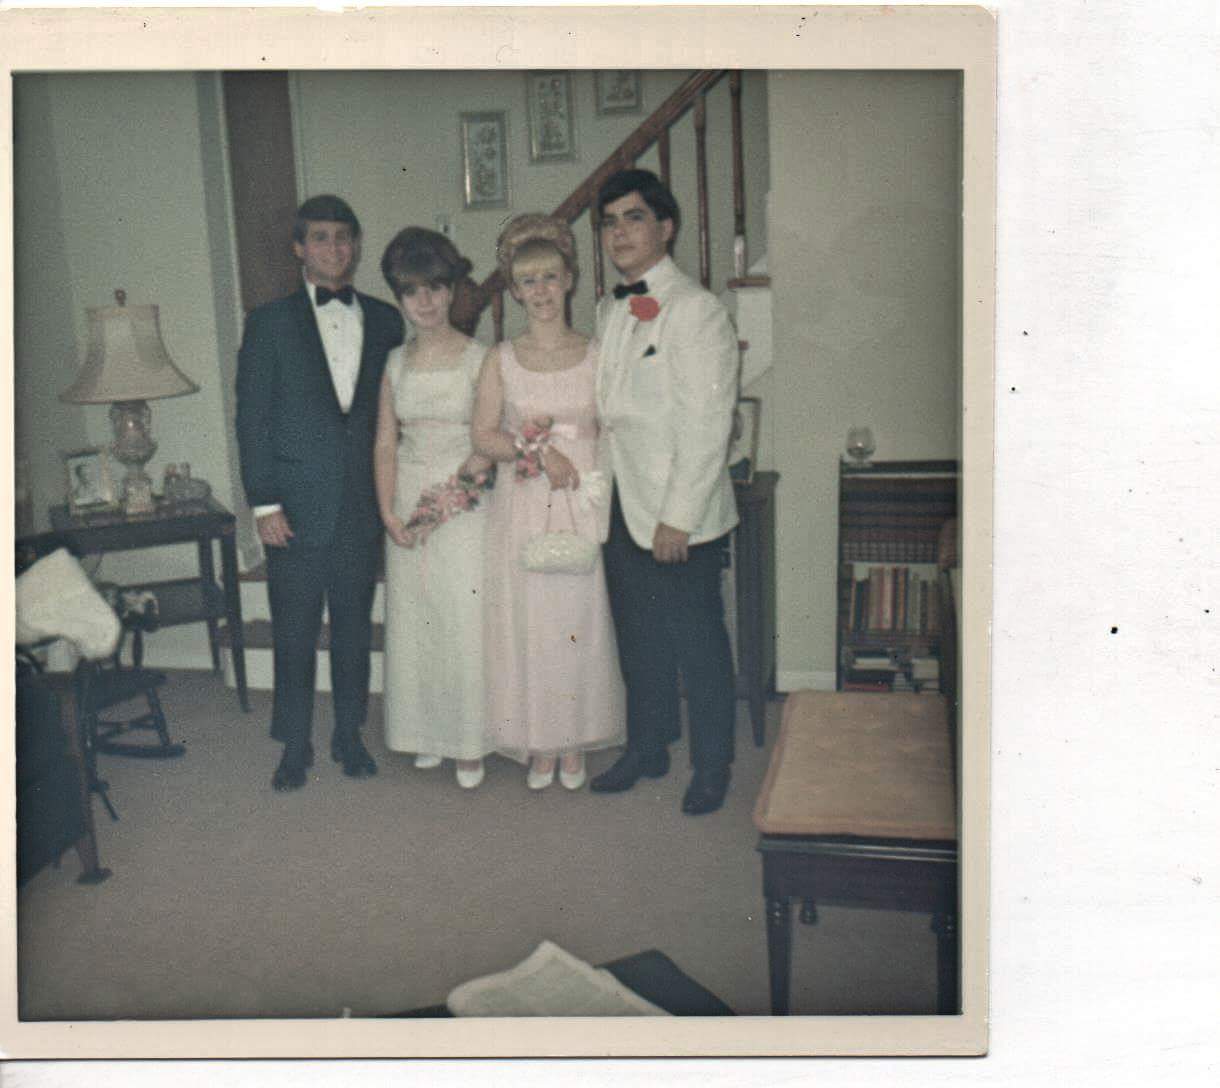 John Adams Prom 6/67. The Flick. Great memories.  All so young! A lifetime ago.